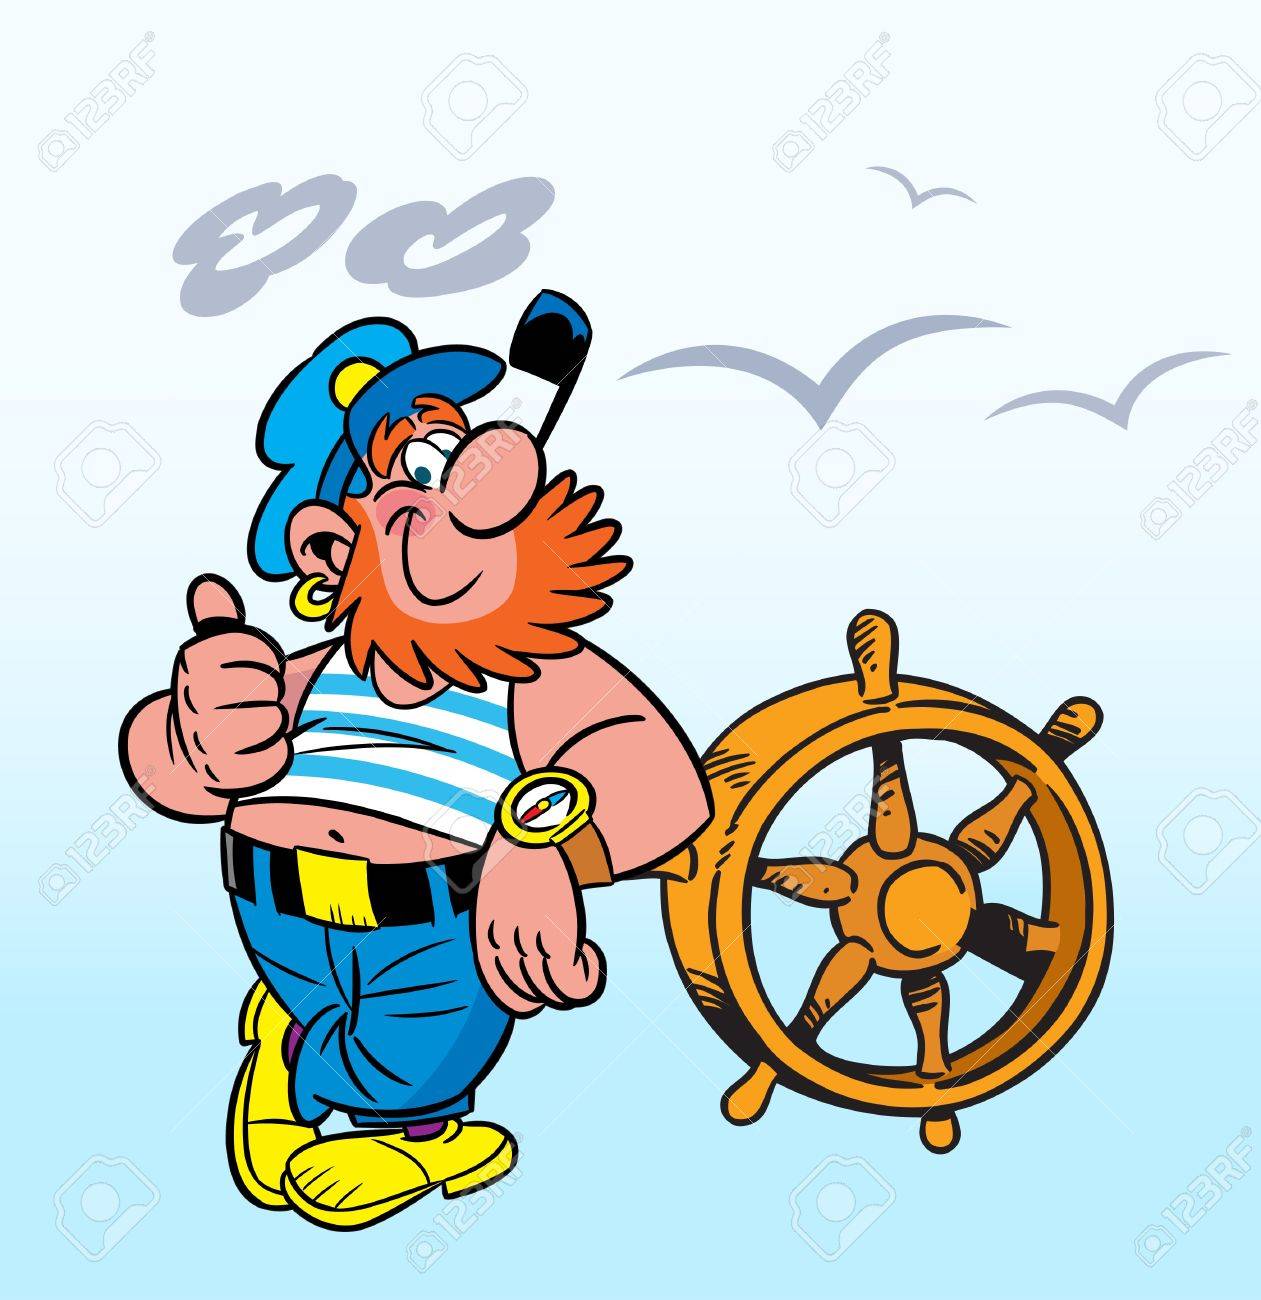 14583109-The-illustration-shows-the-red-haired-funny-captain-of-at-the-helm--Stock-Vector.jpg